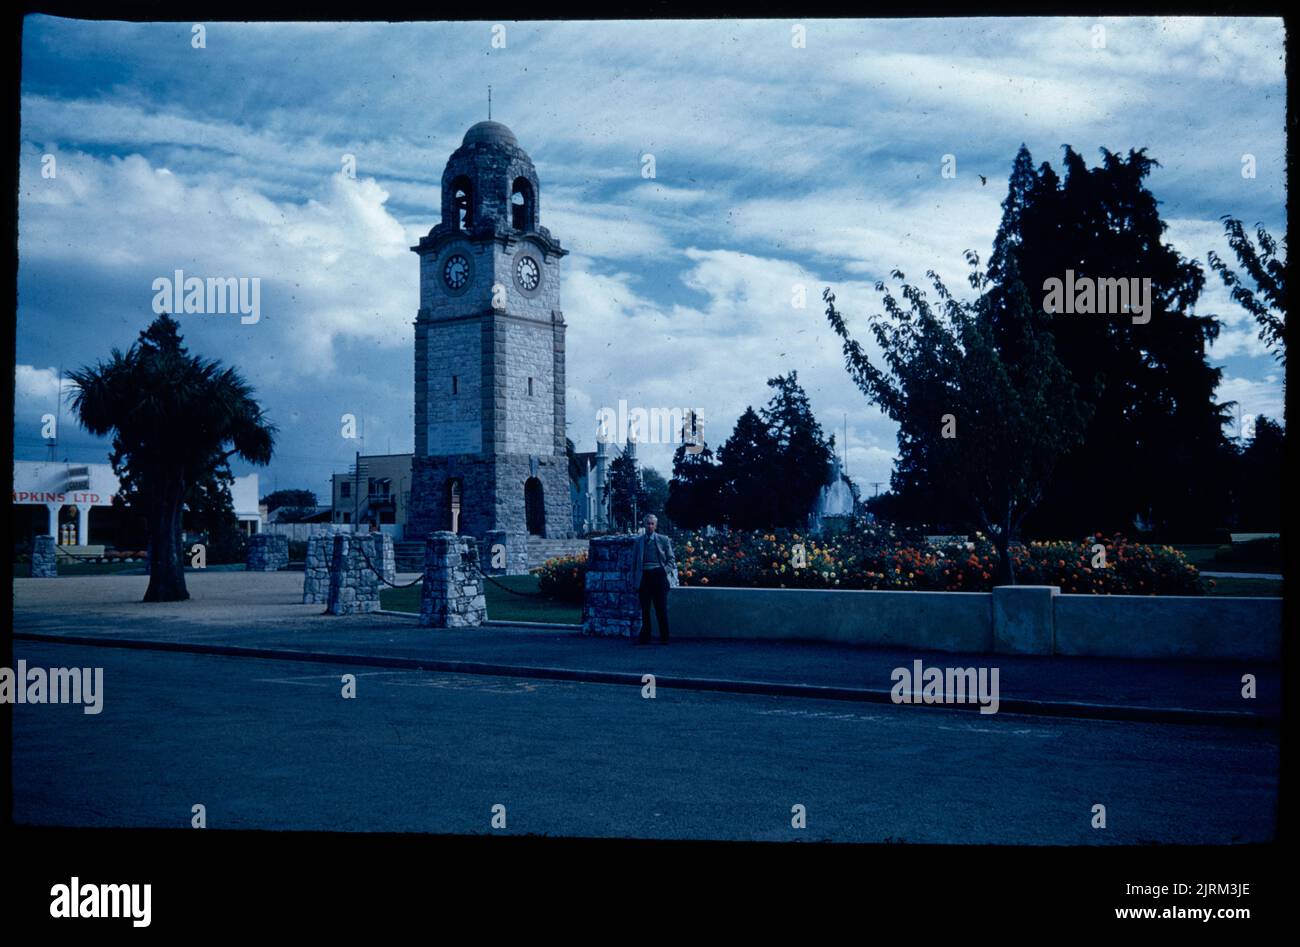 Blenheim - clock tower in Seymour Square, 24 March 1959-13 April1959, Marlborough, by Leslie Adkin. Gift of Adkin Family, 1997. Stock Photo